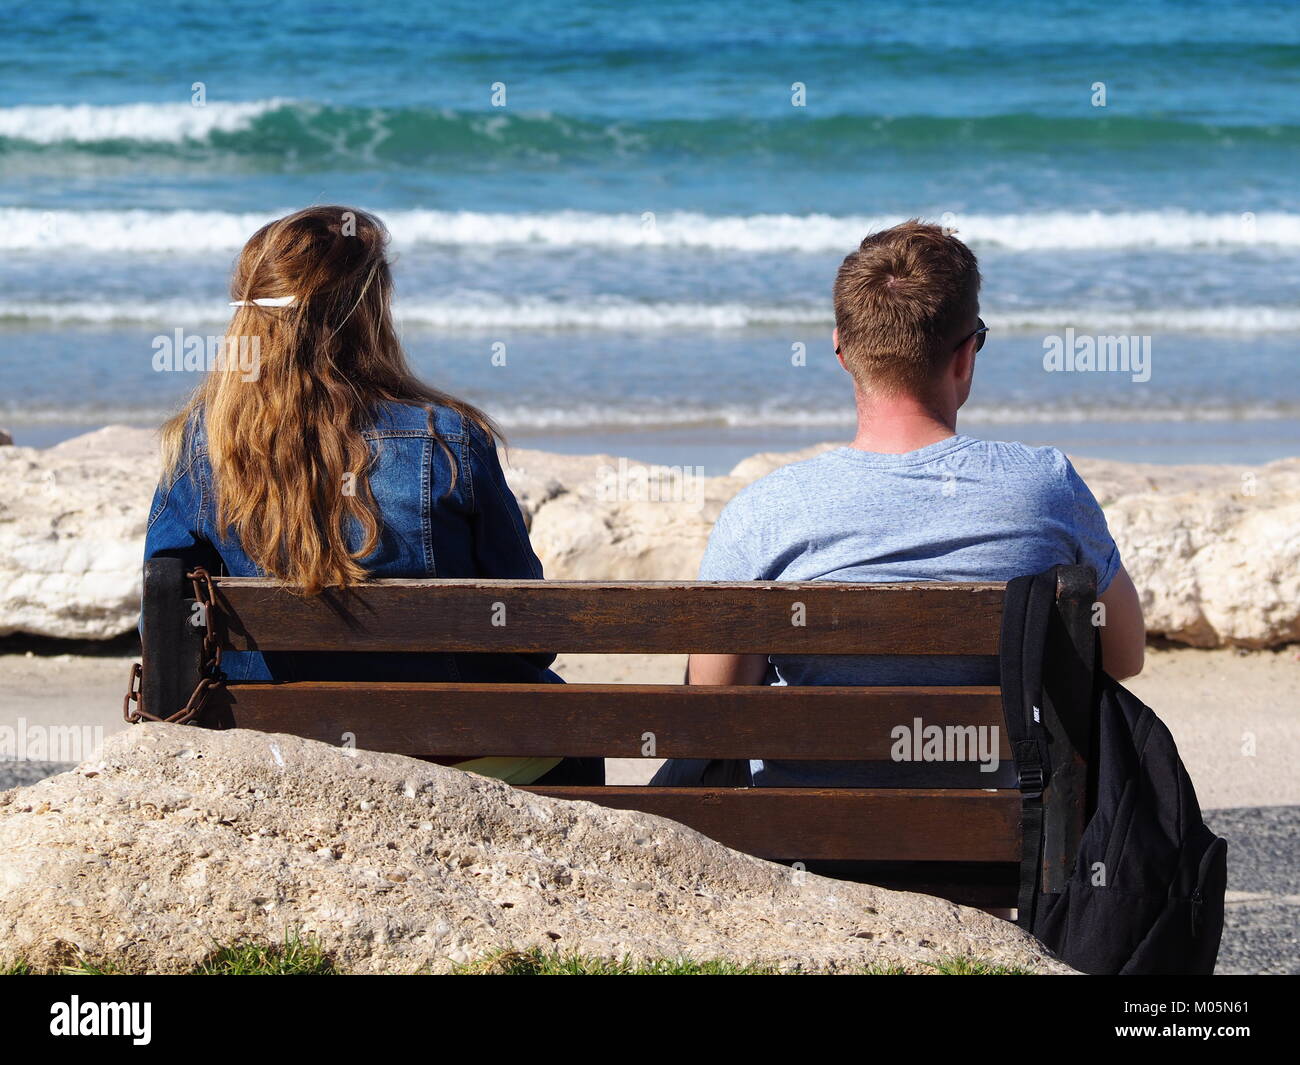 two Friends sitting on a bench on the beach promenade on a perfect clear day watching the sea Stock Photo